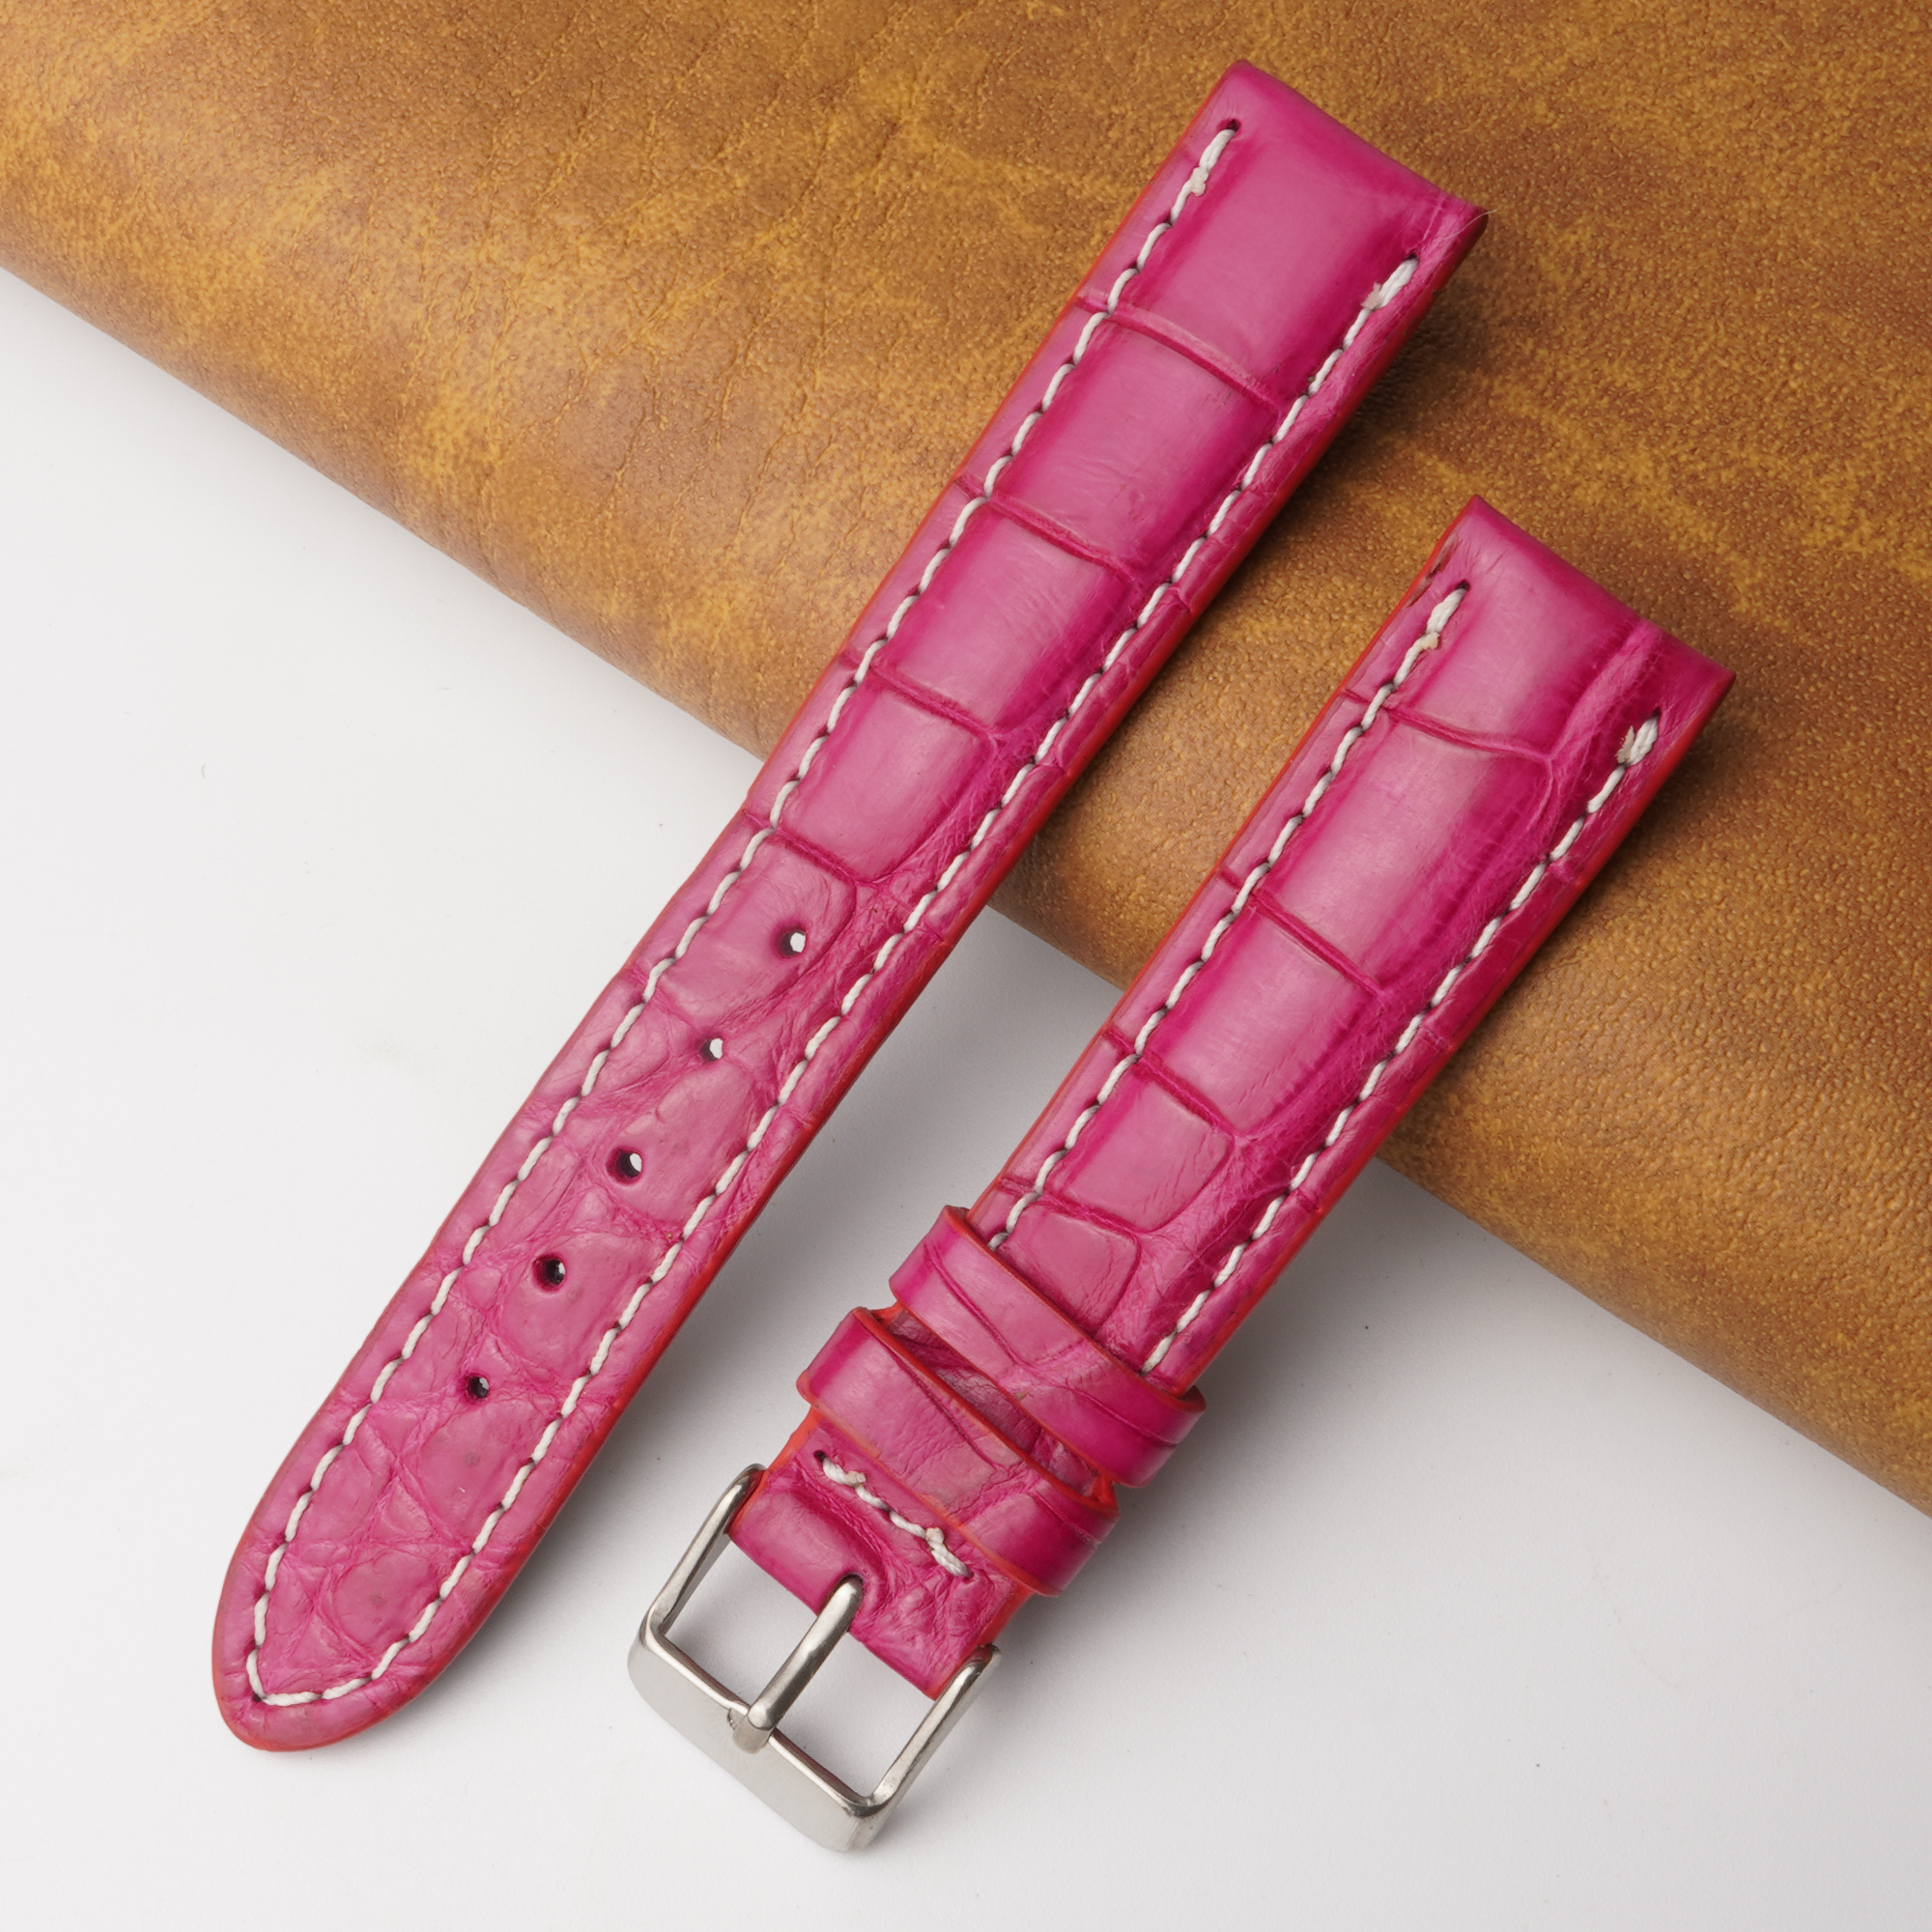 18mm Pink Unique Pattern Alligator Leather Watch Band For Men DH-226AC